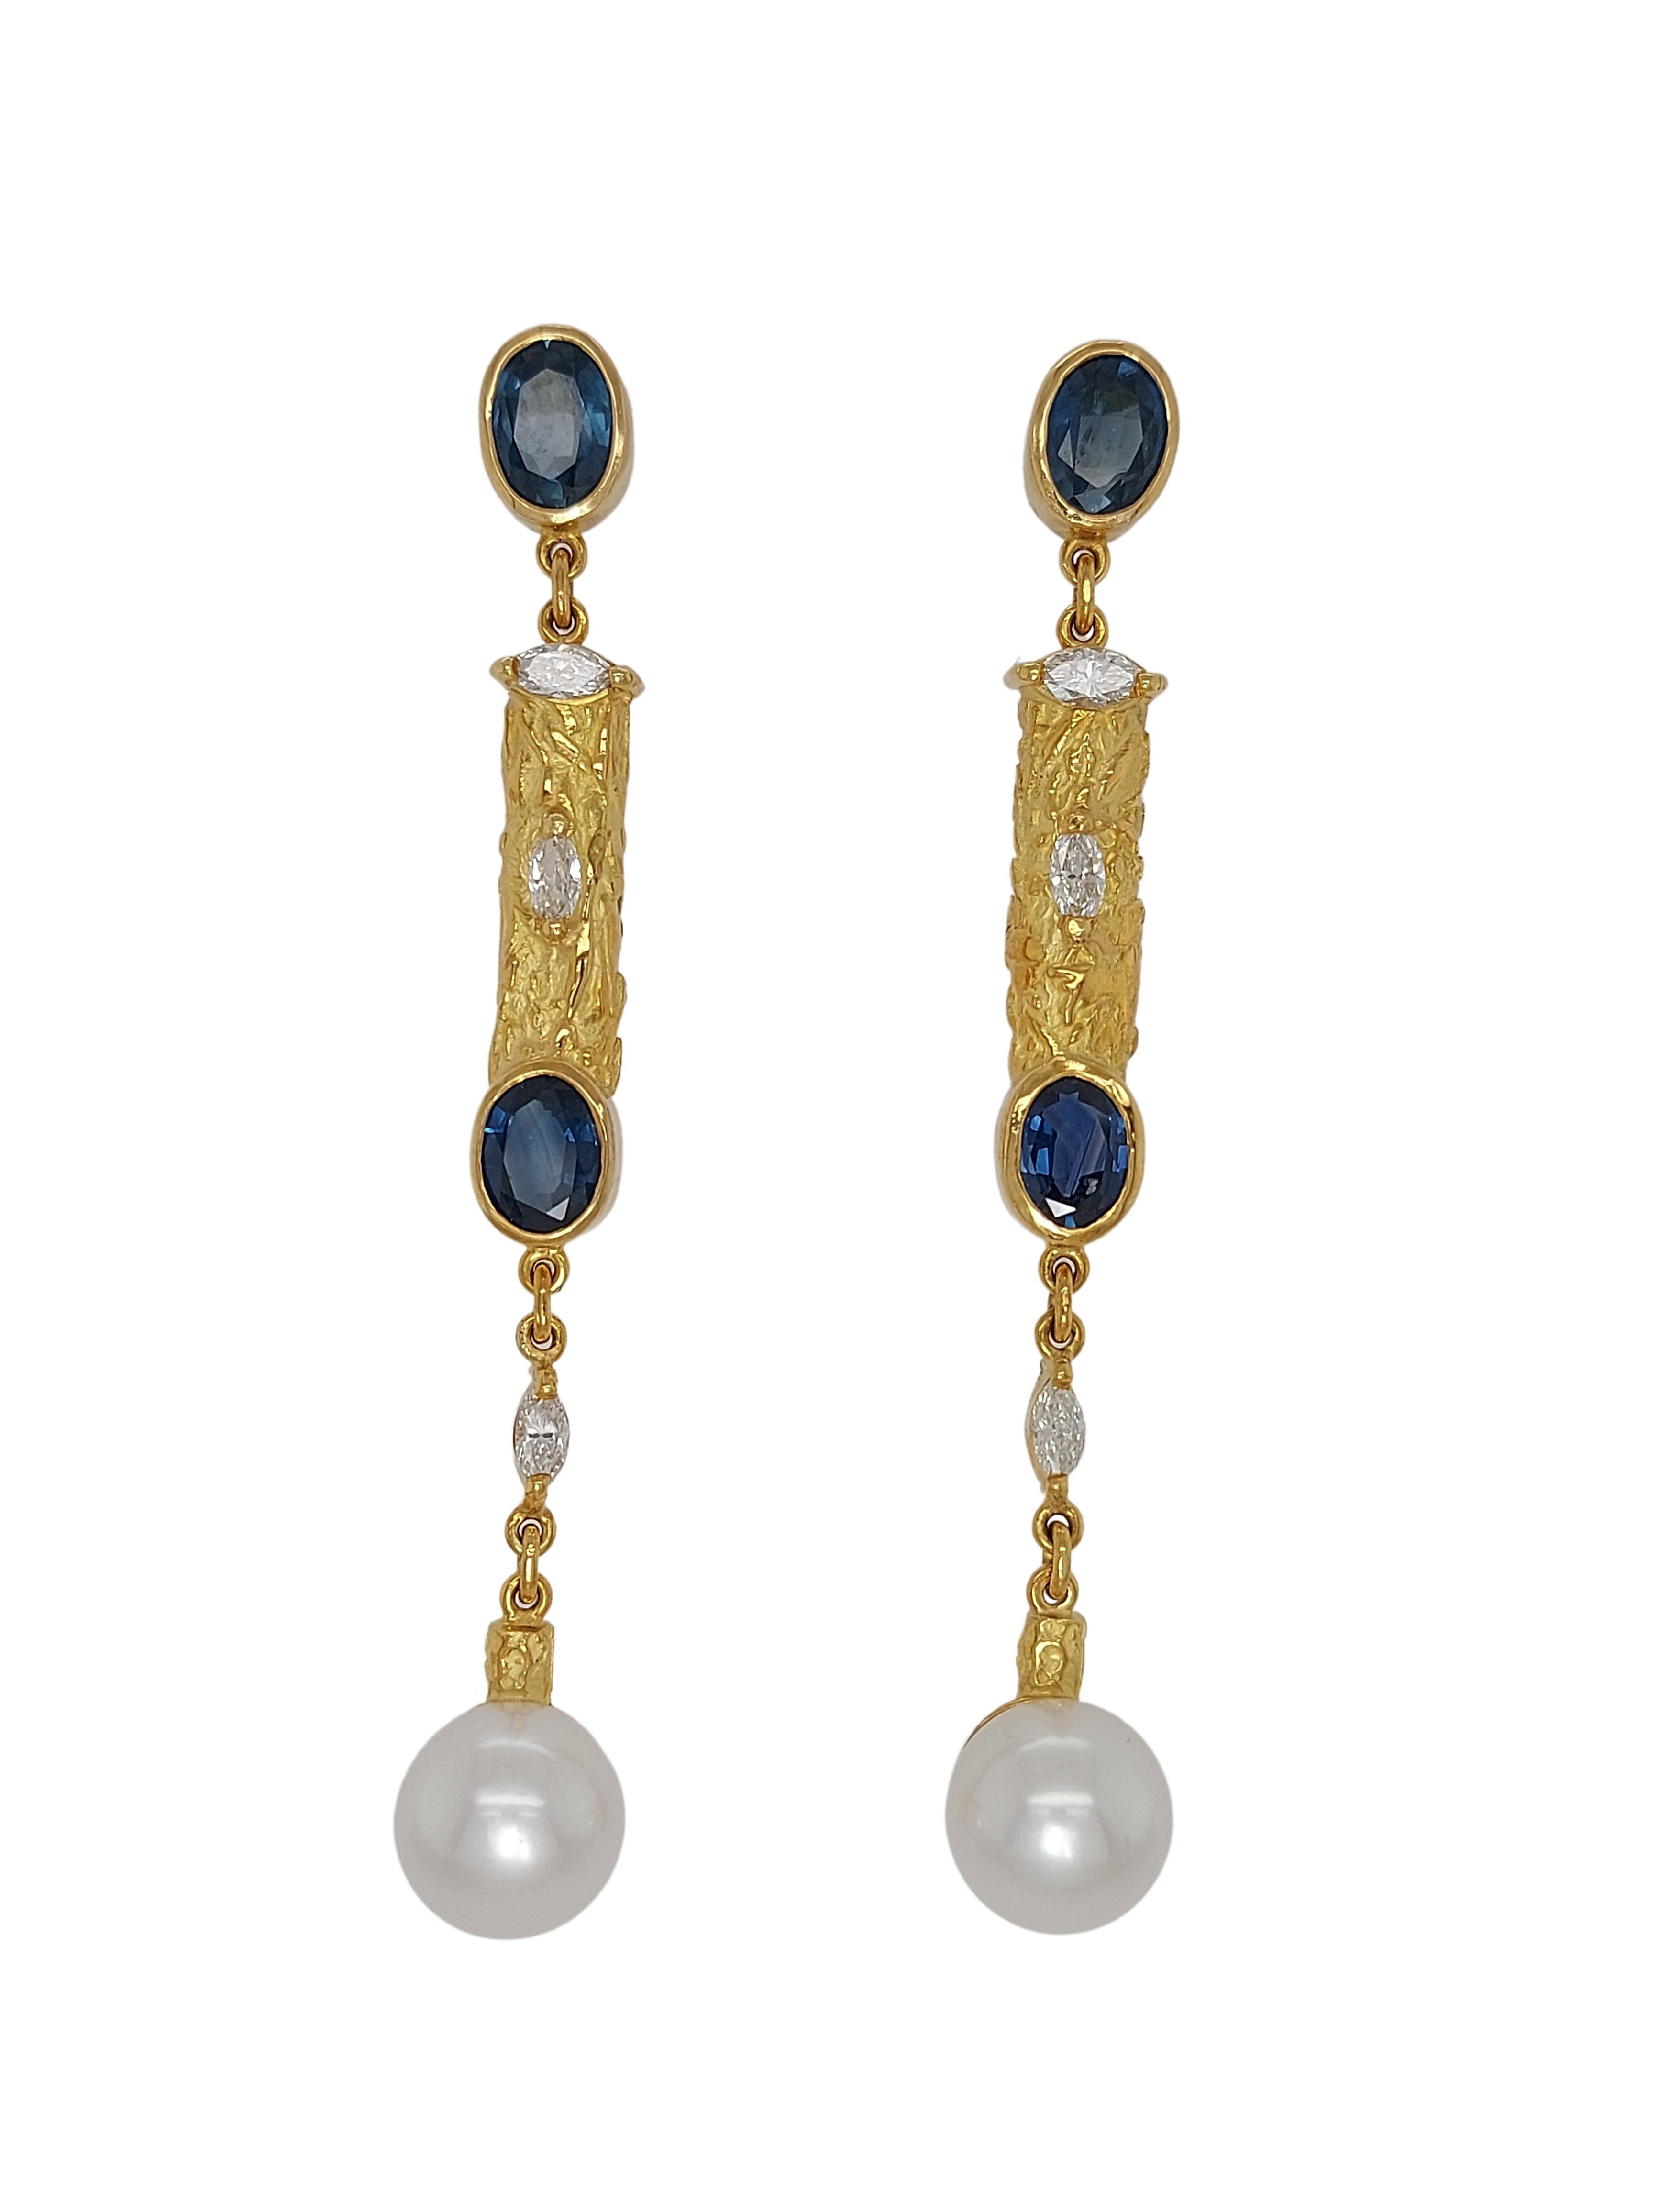 J.P De Saedeleer 18 Kt gold Earrings with 5.84 Ct Sapphires, Diamonds, Pearl For Sale 2